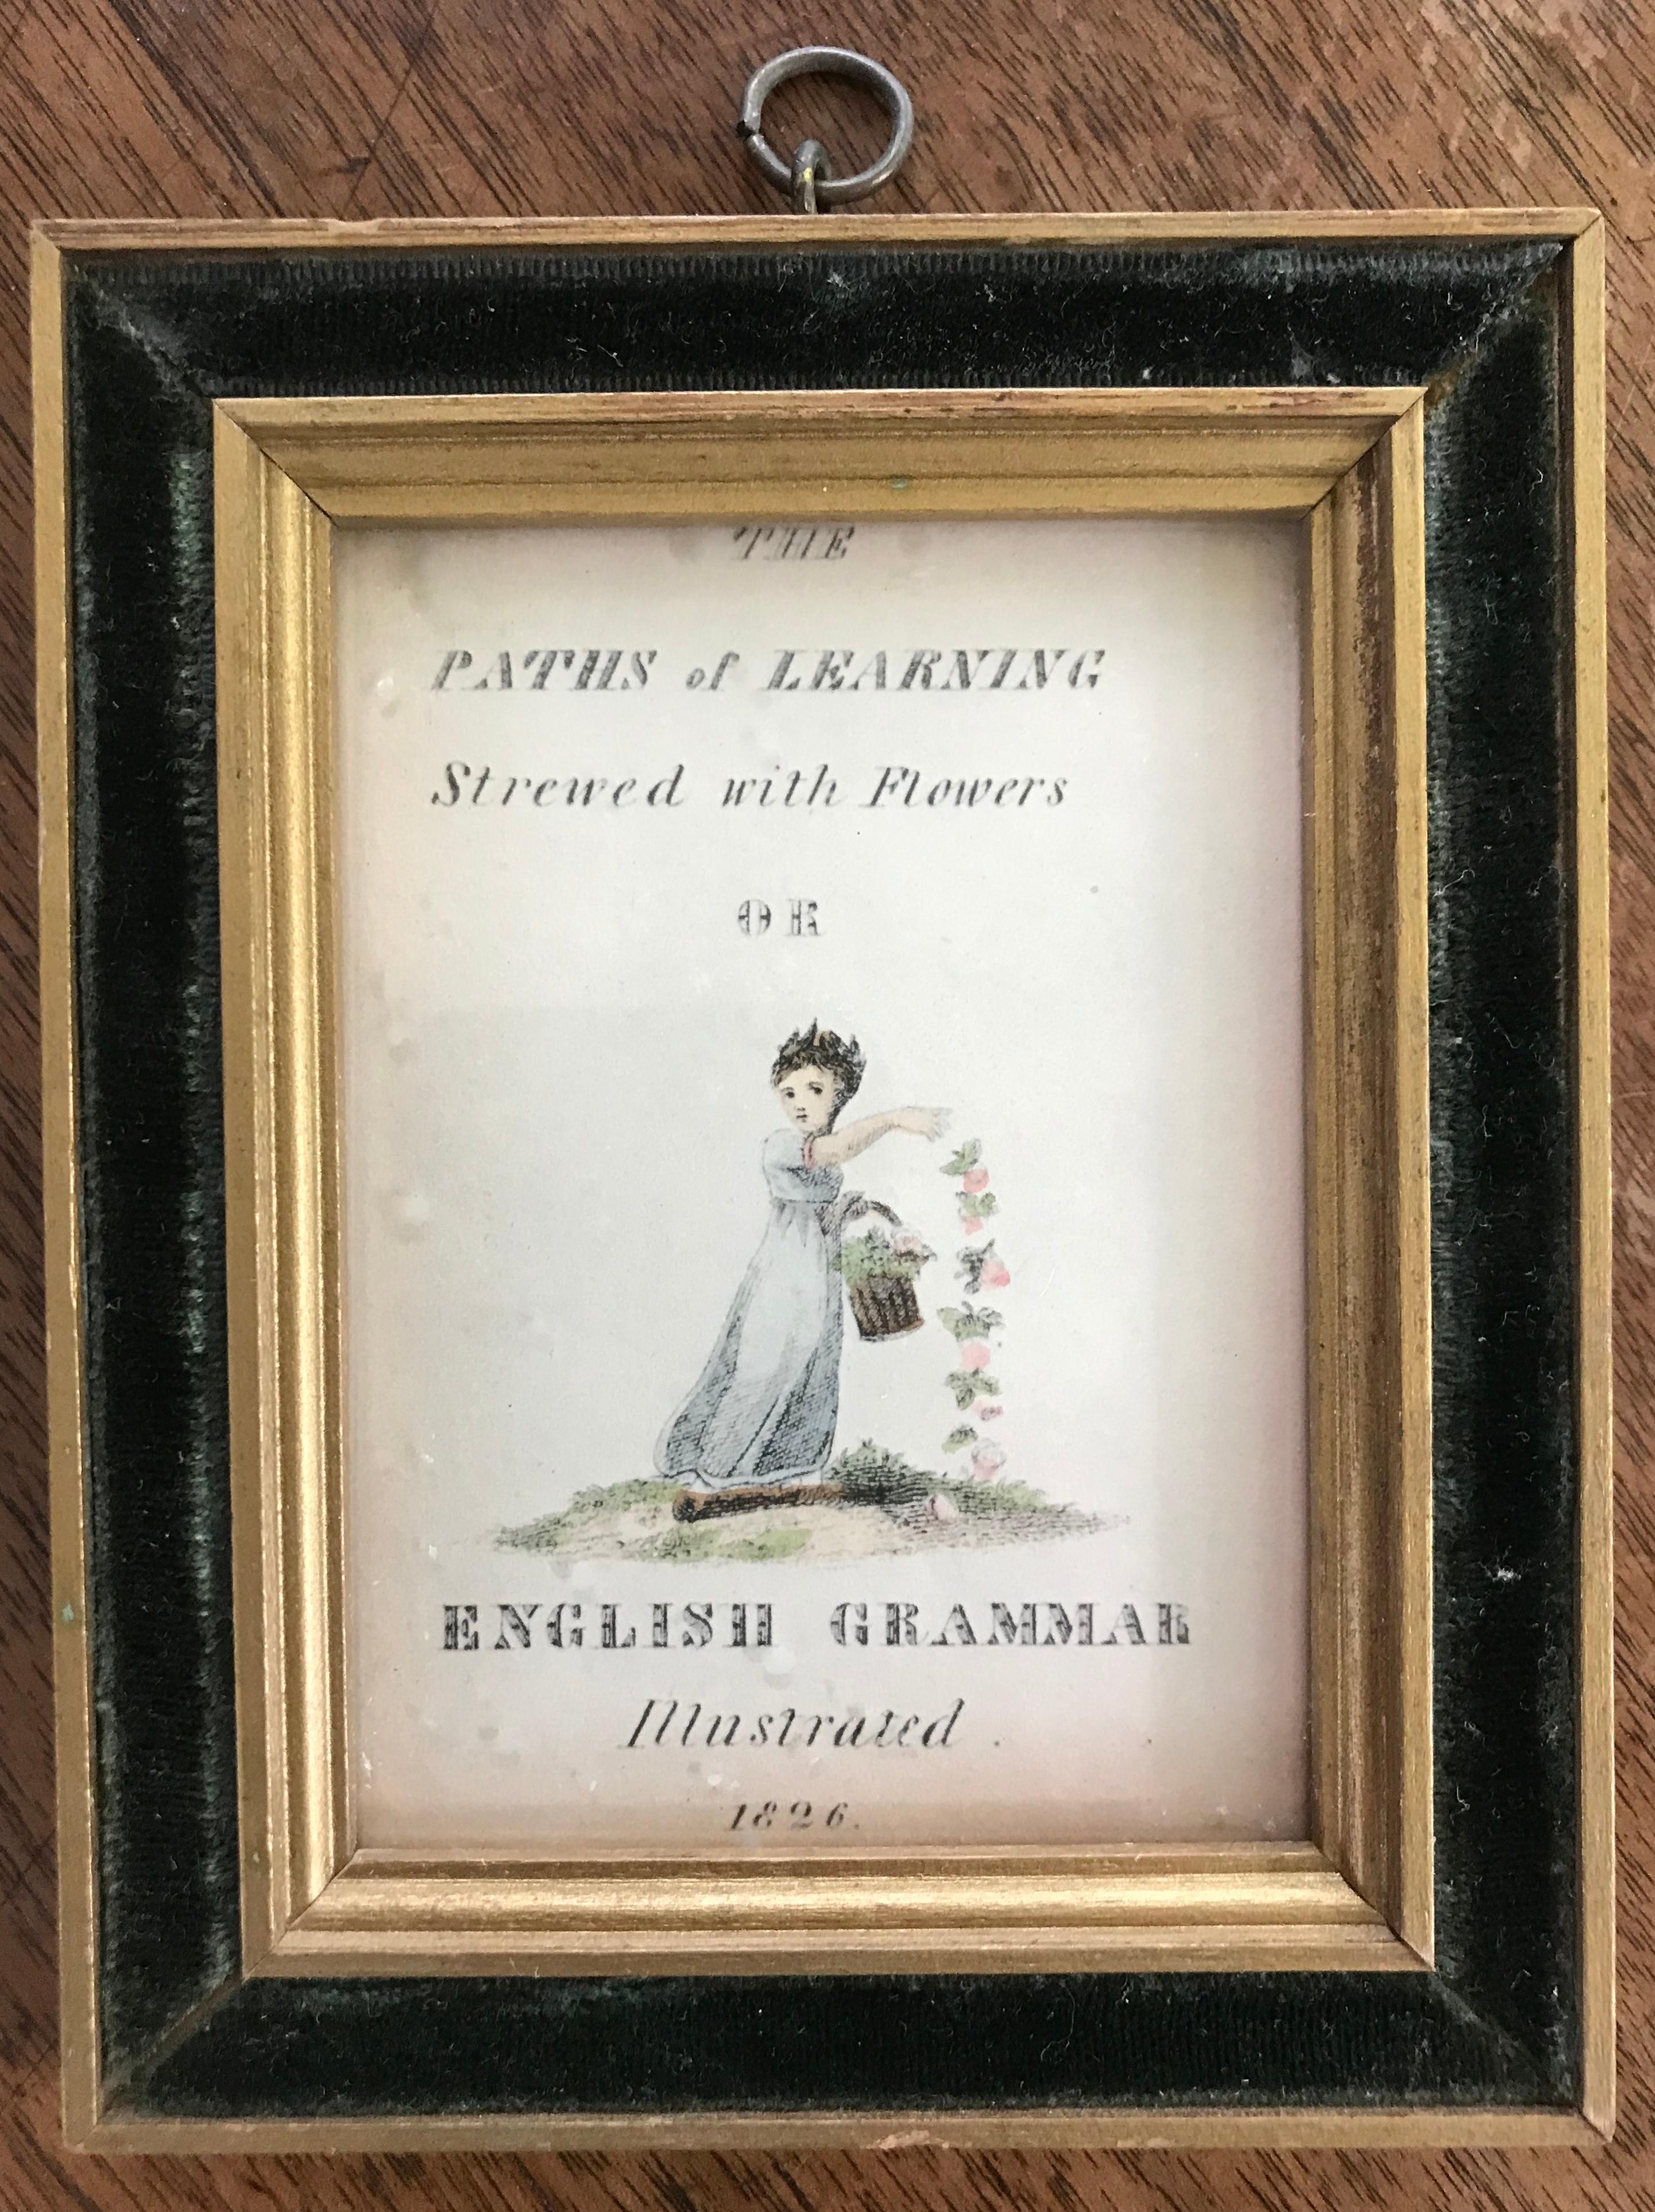 English grammar framed illustrations. From the Paths of Learning Strewn with Flowers series of English Grammar Illustrated by Asaph Willard. Four hand colored engravings including: frontispiece, adjectives, articles and vowels; published by Harris